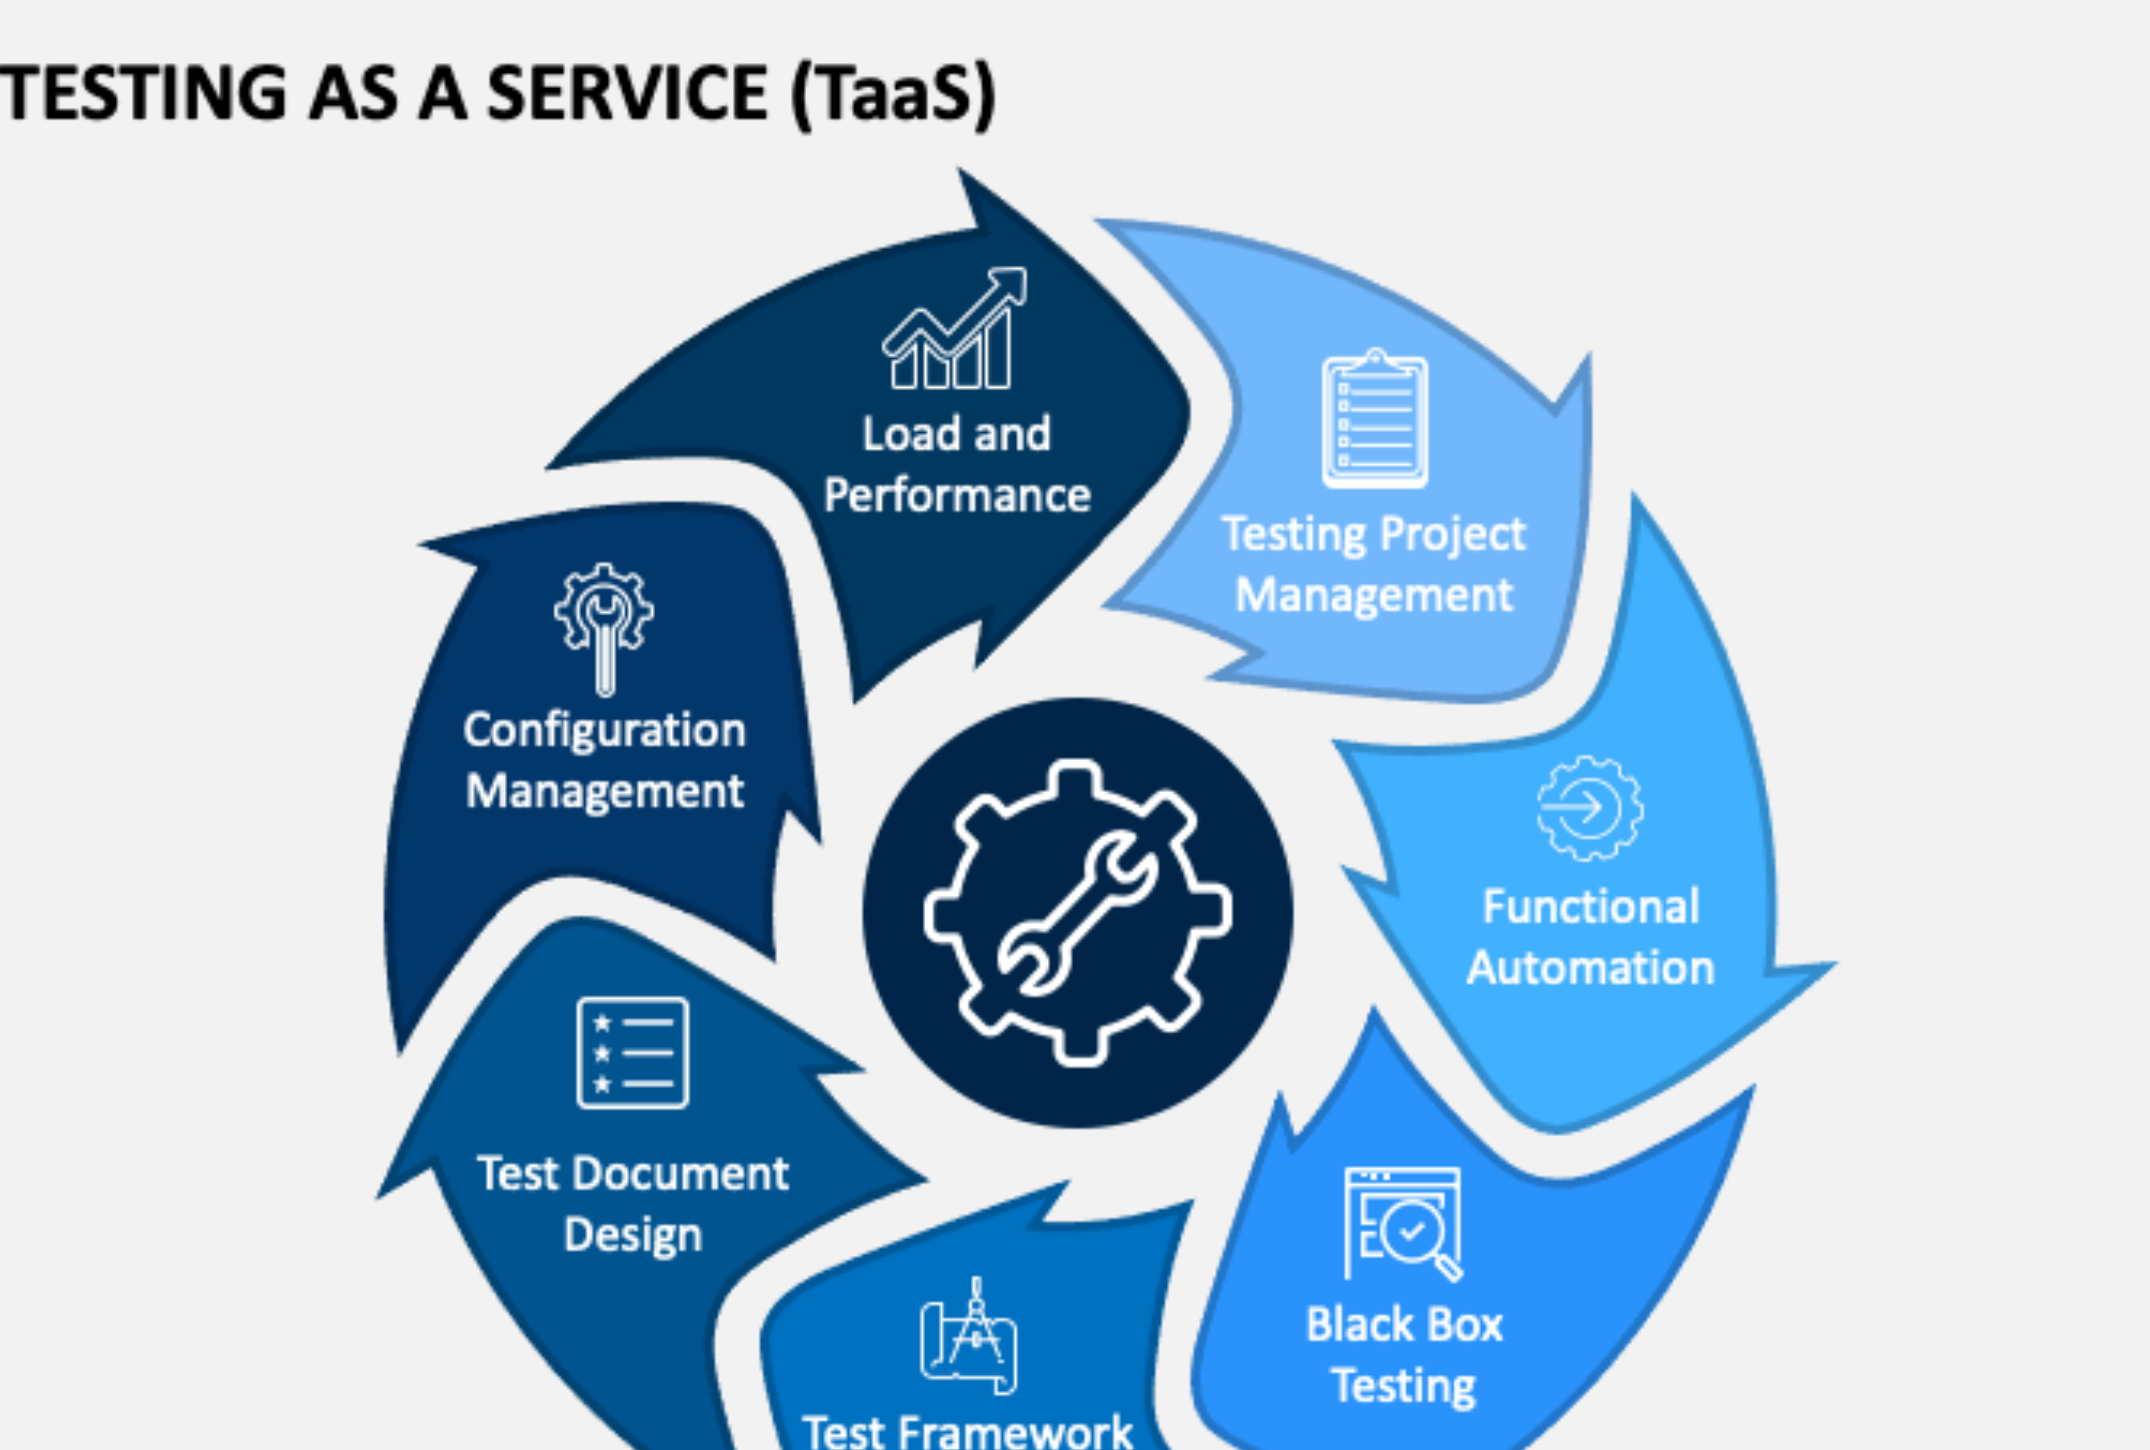 A new way to test apps? – Testing as a Service (TaaS)